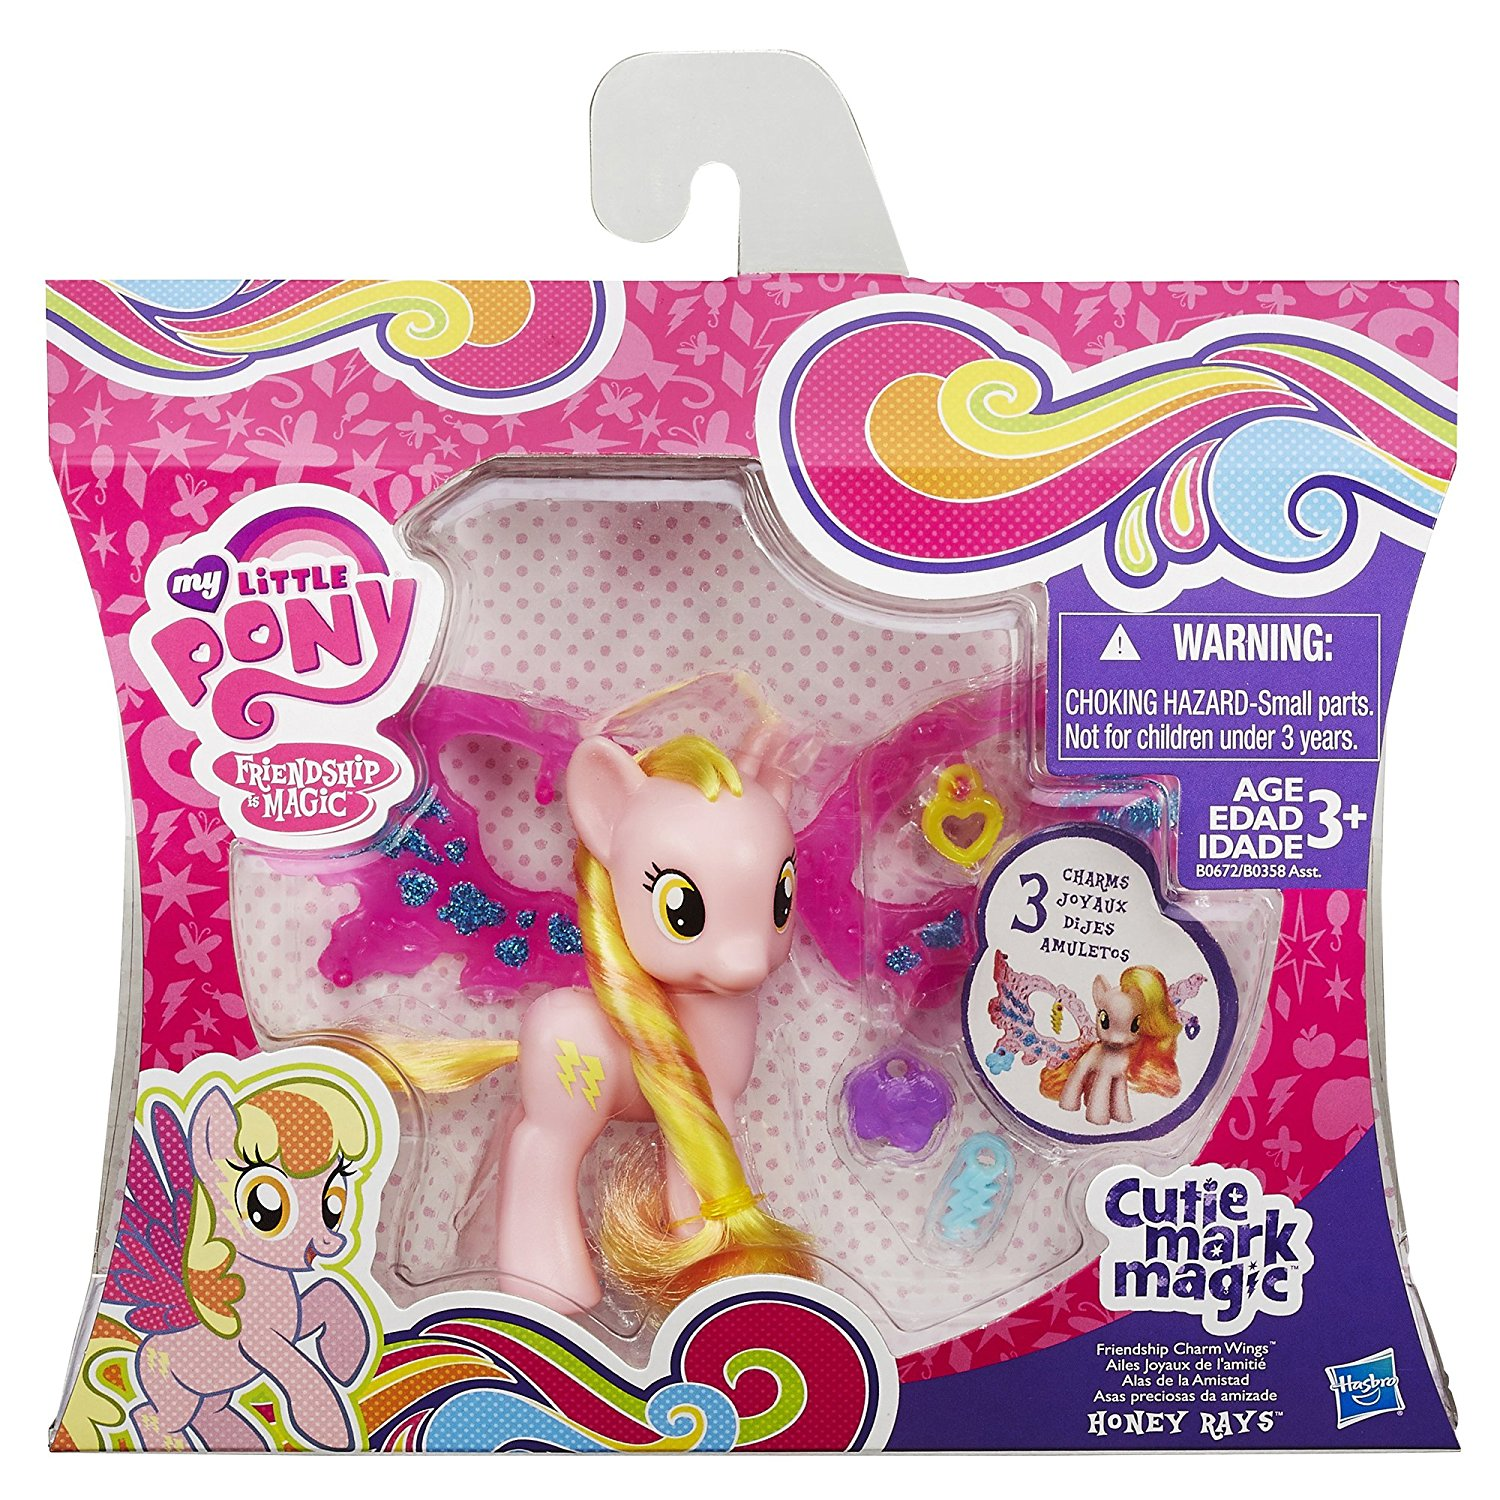 My Little Pony Cutie Mark Magic Friendship Charm Wings Honey Rays Figure Only $6.23!